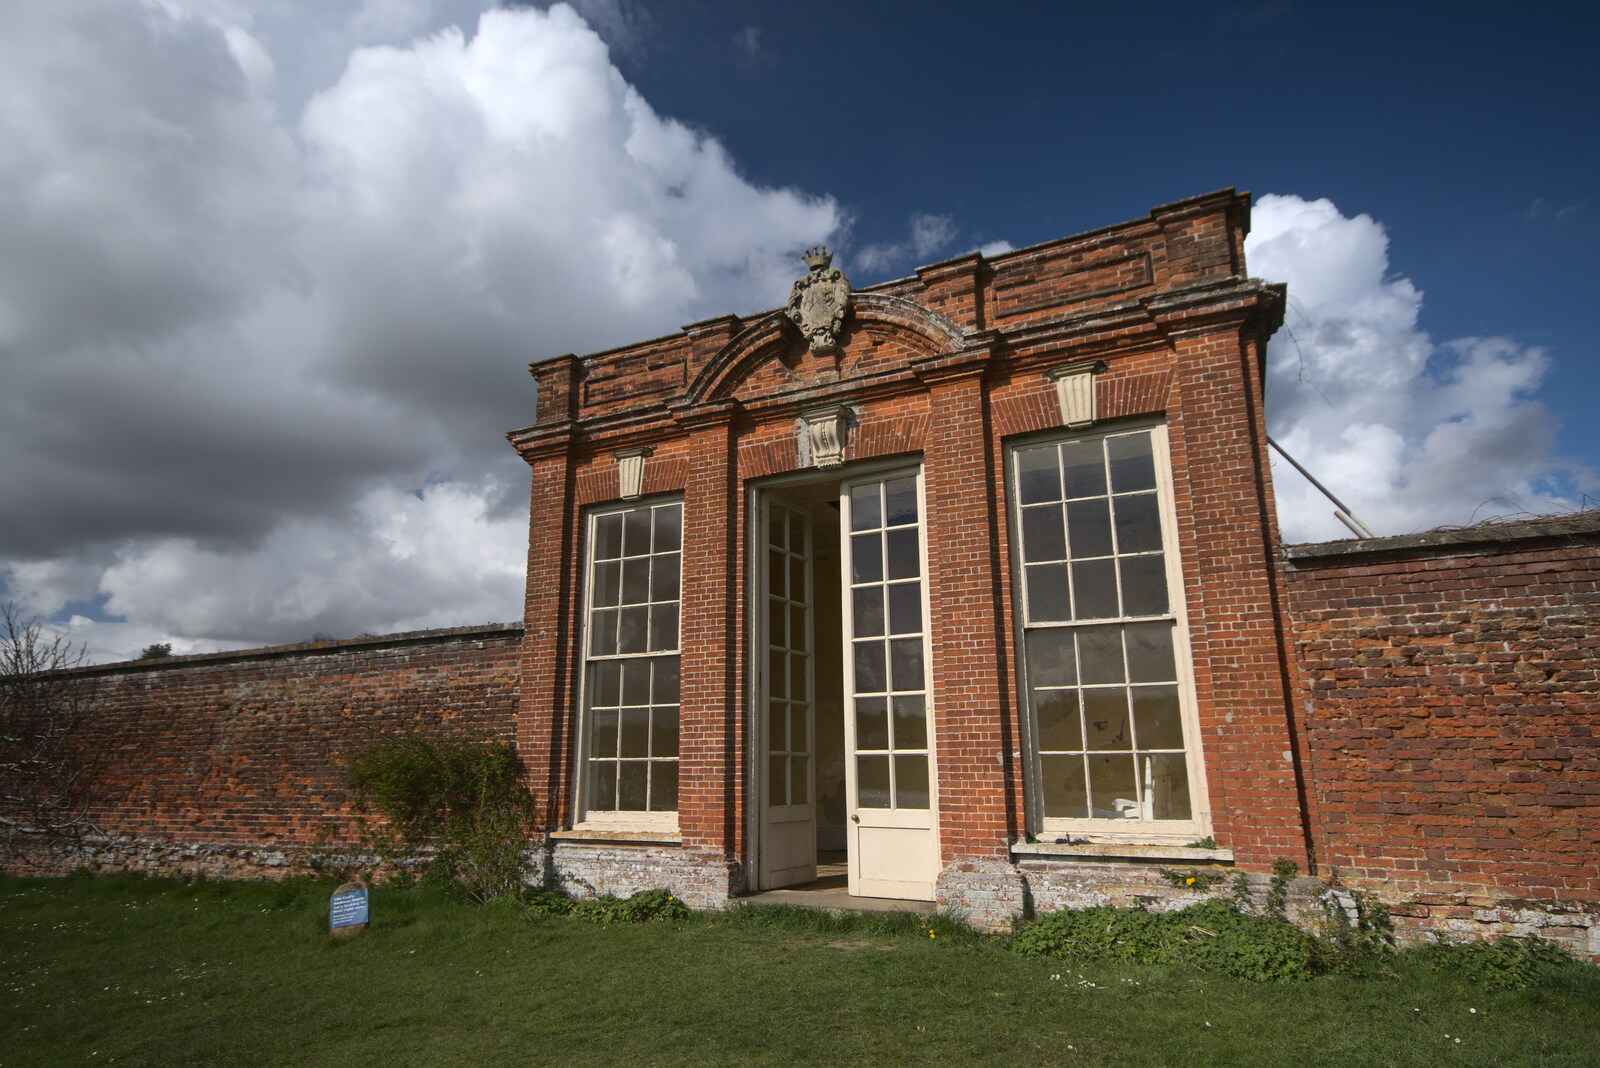 The Earl's Summer House from A Return to Ickworth House, Horringer, Suffolk - 11th April 2021